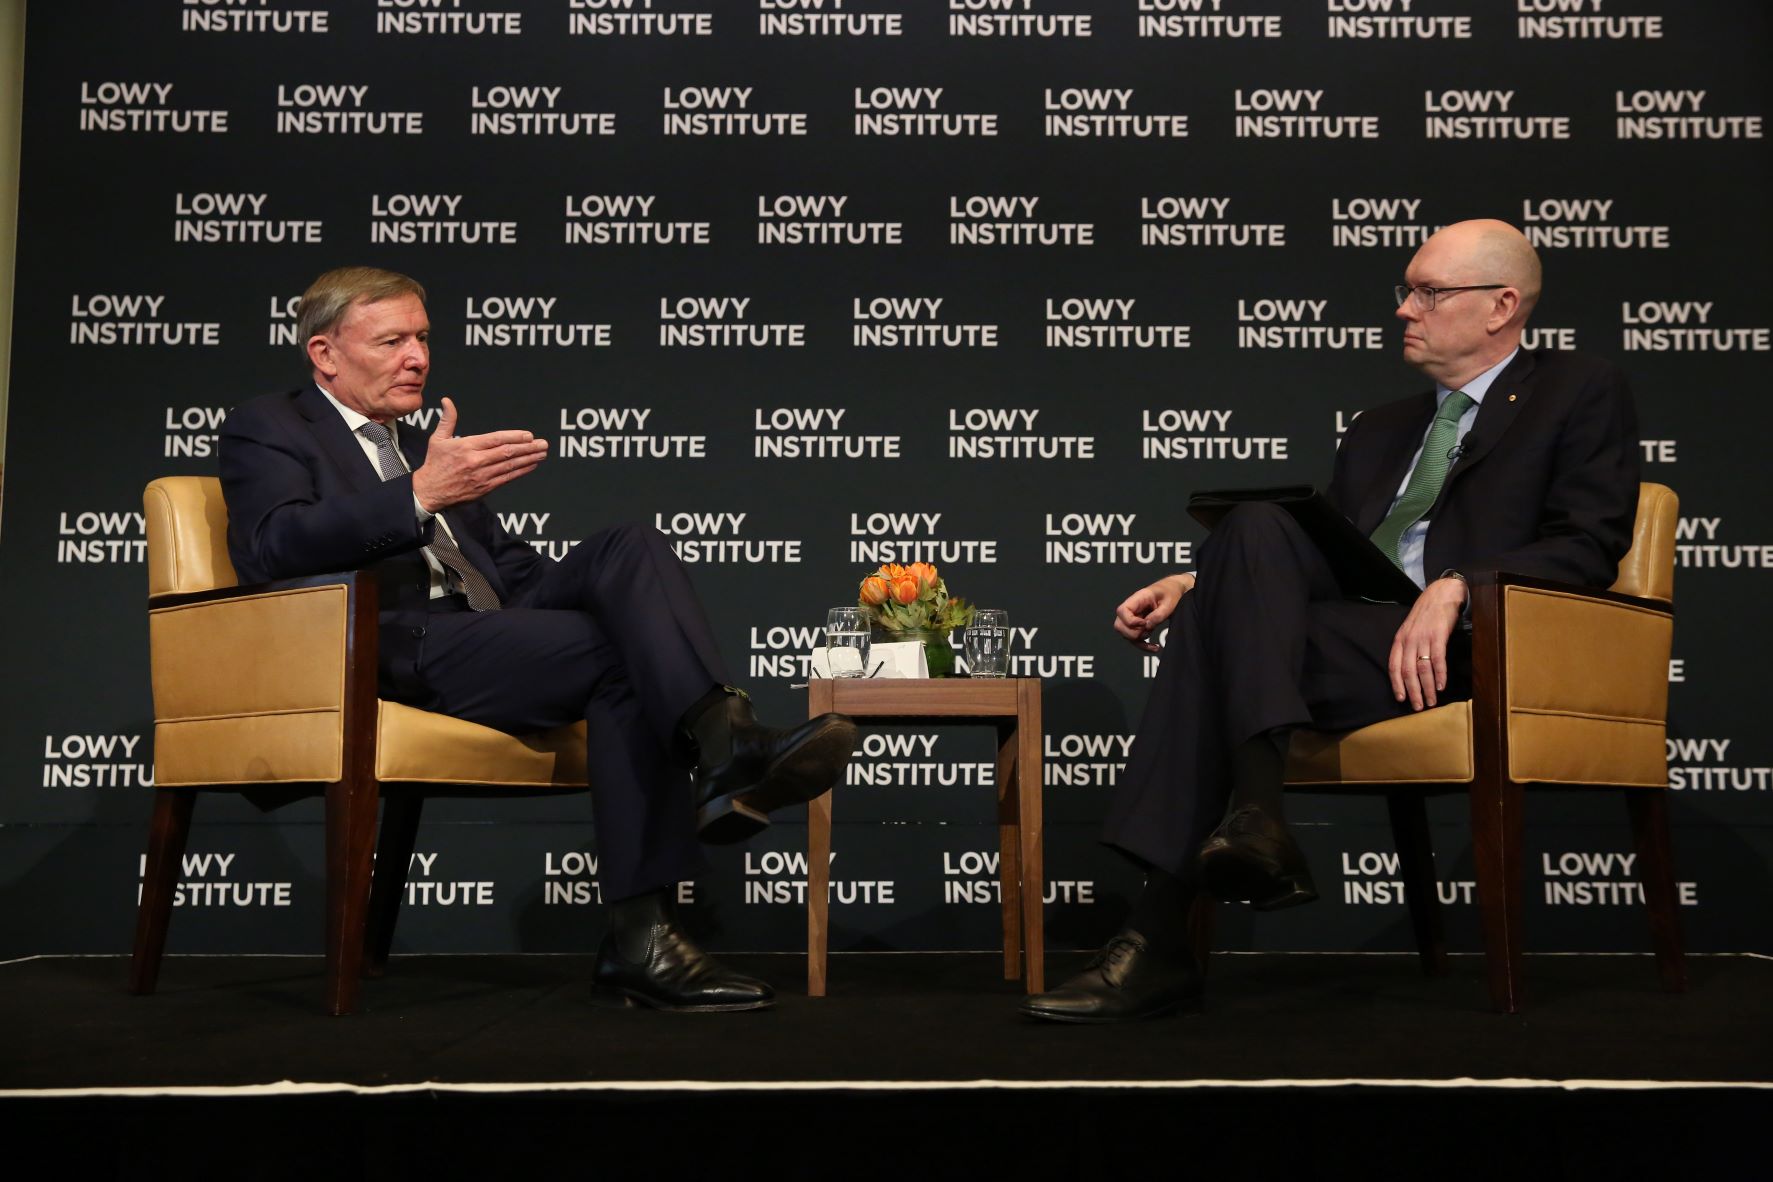 Paul Symon, Director-General of the Australian Secret Intelligence Service, speaks at the Lowy Institute on 10 May 2022